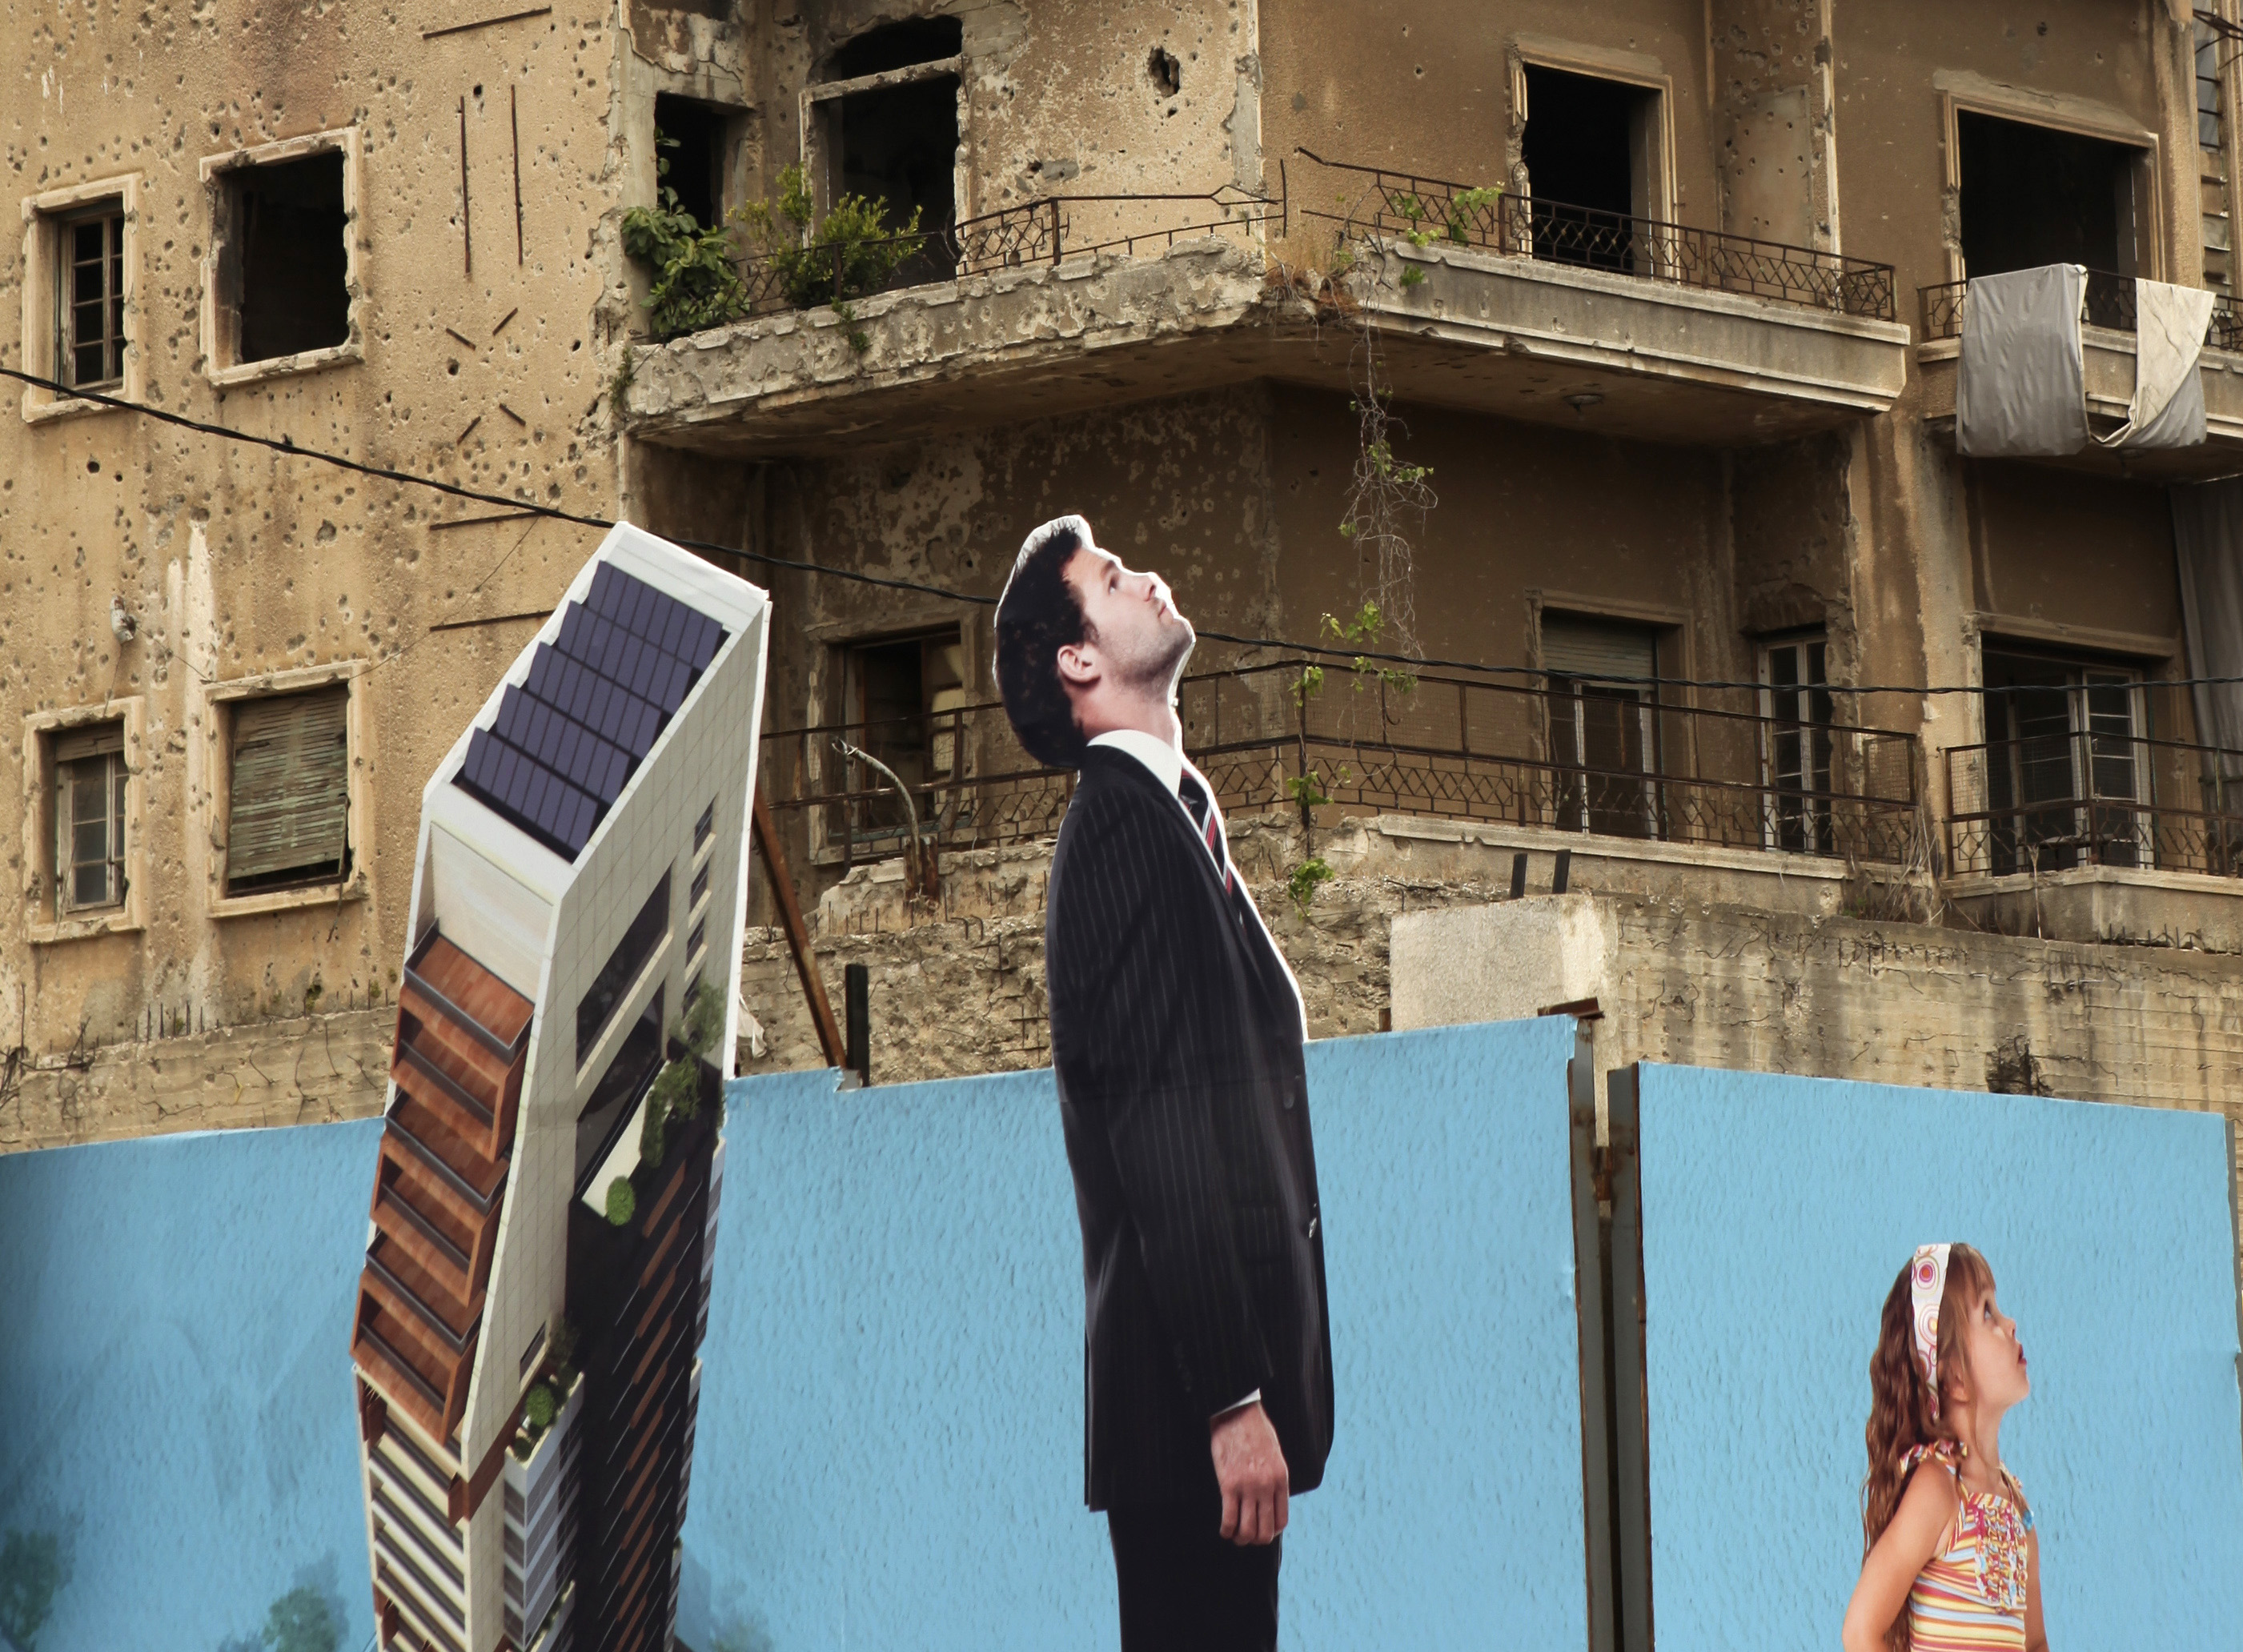 A billboard, advertising a luxury residential complex, surrounds a construction site in Beirut